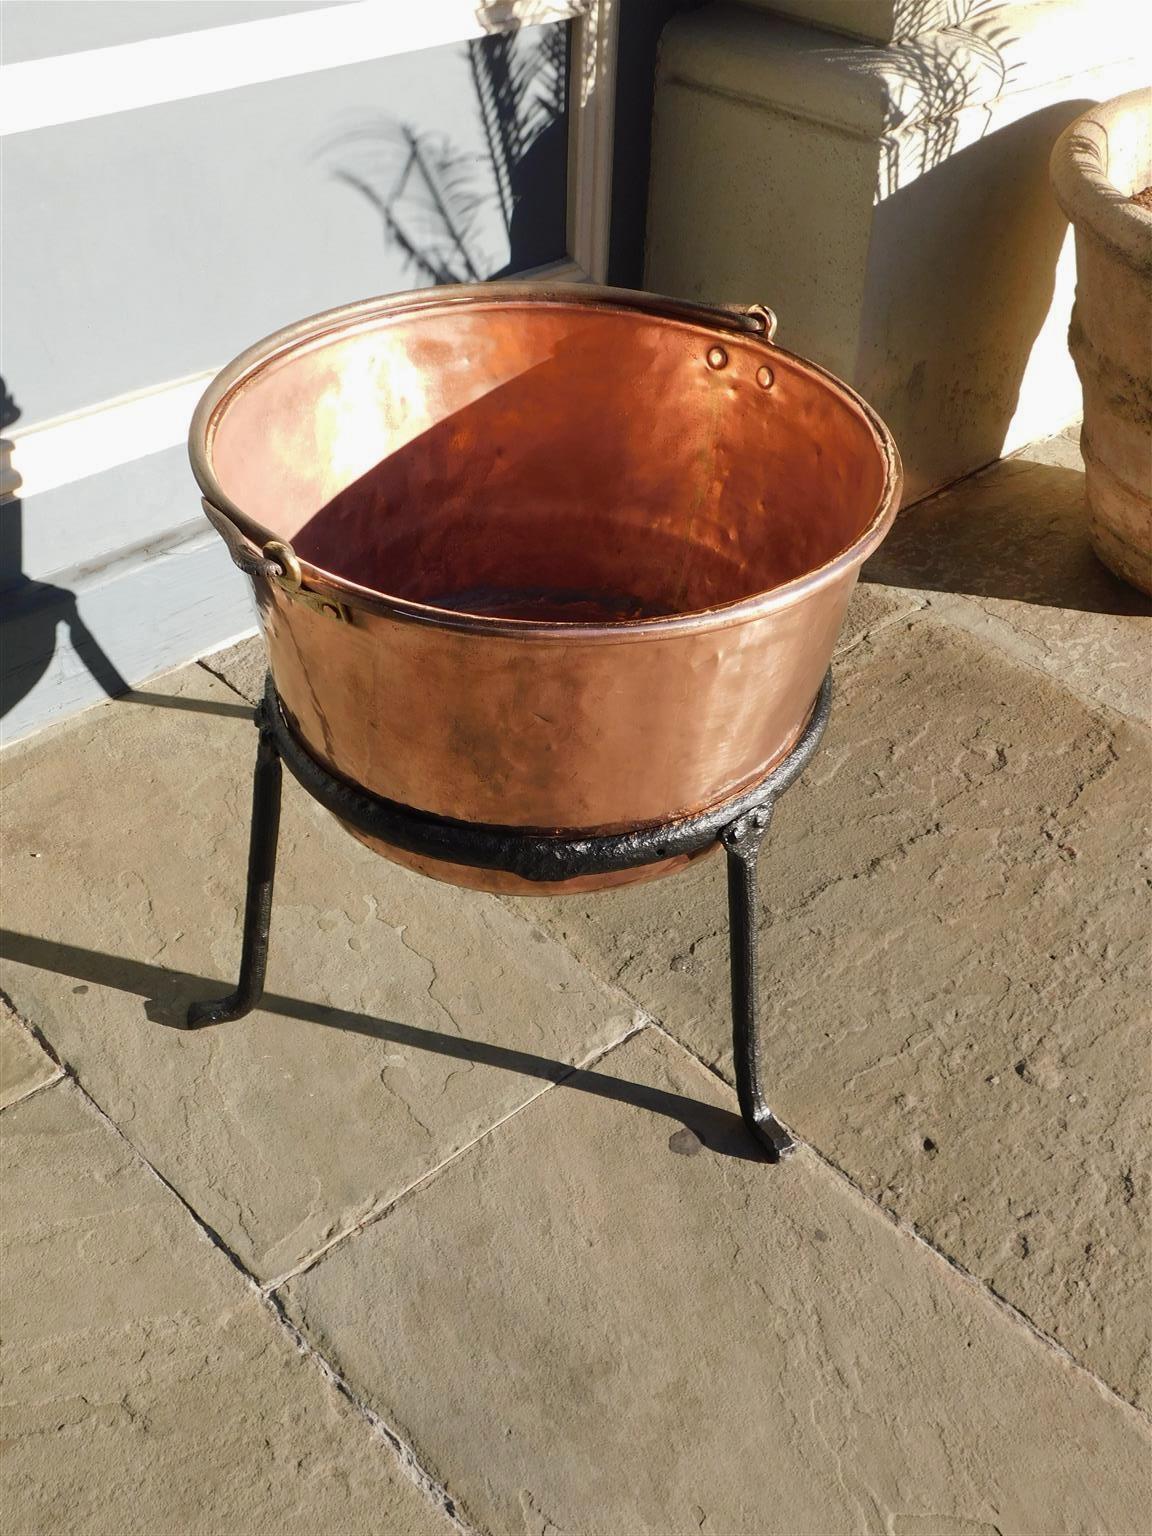 American copper and wrought iron plantation cauldron with brass ring mounts, original wrought iron folding handle, and supported by the original circular fitted three leg Stand with stylized feet. Late 18th century.